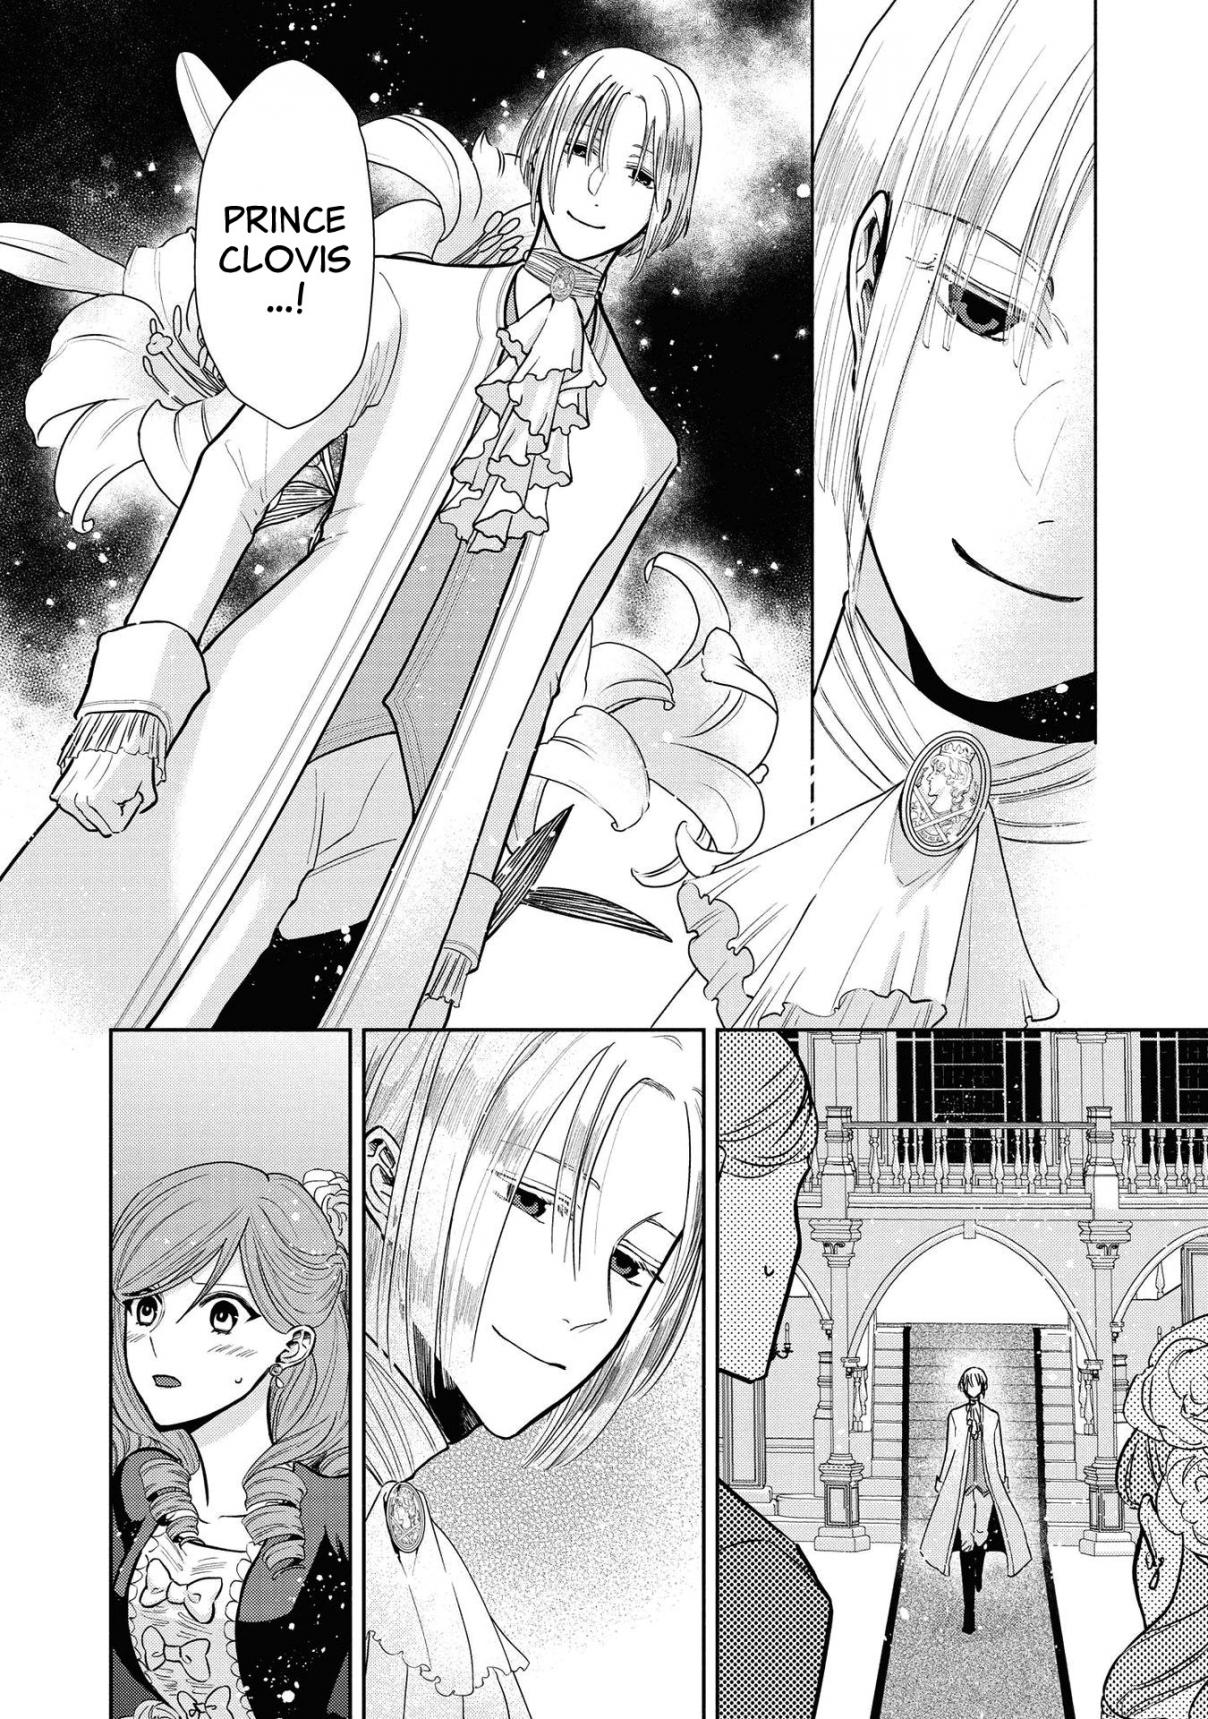 Though I May Be a Villainess, I'll Show You I Can Obtain Happiness! Vol. 1 Ch. 5 The Villainess Trifles with the Second Prince's First Love